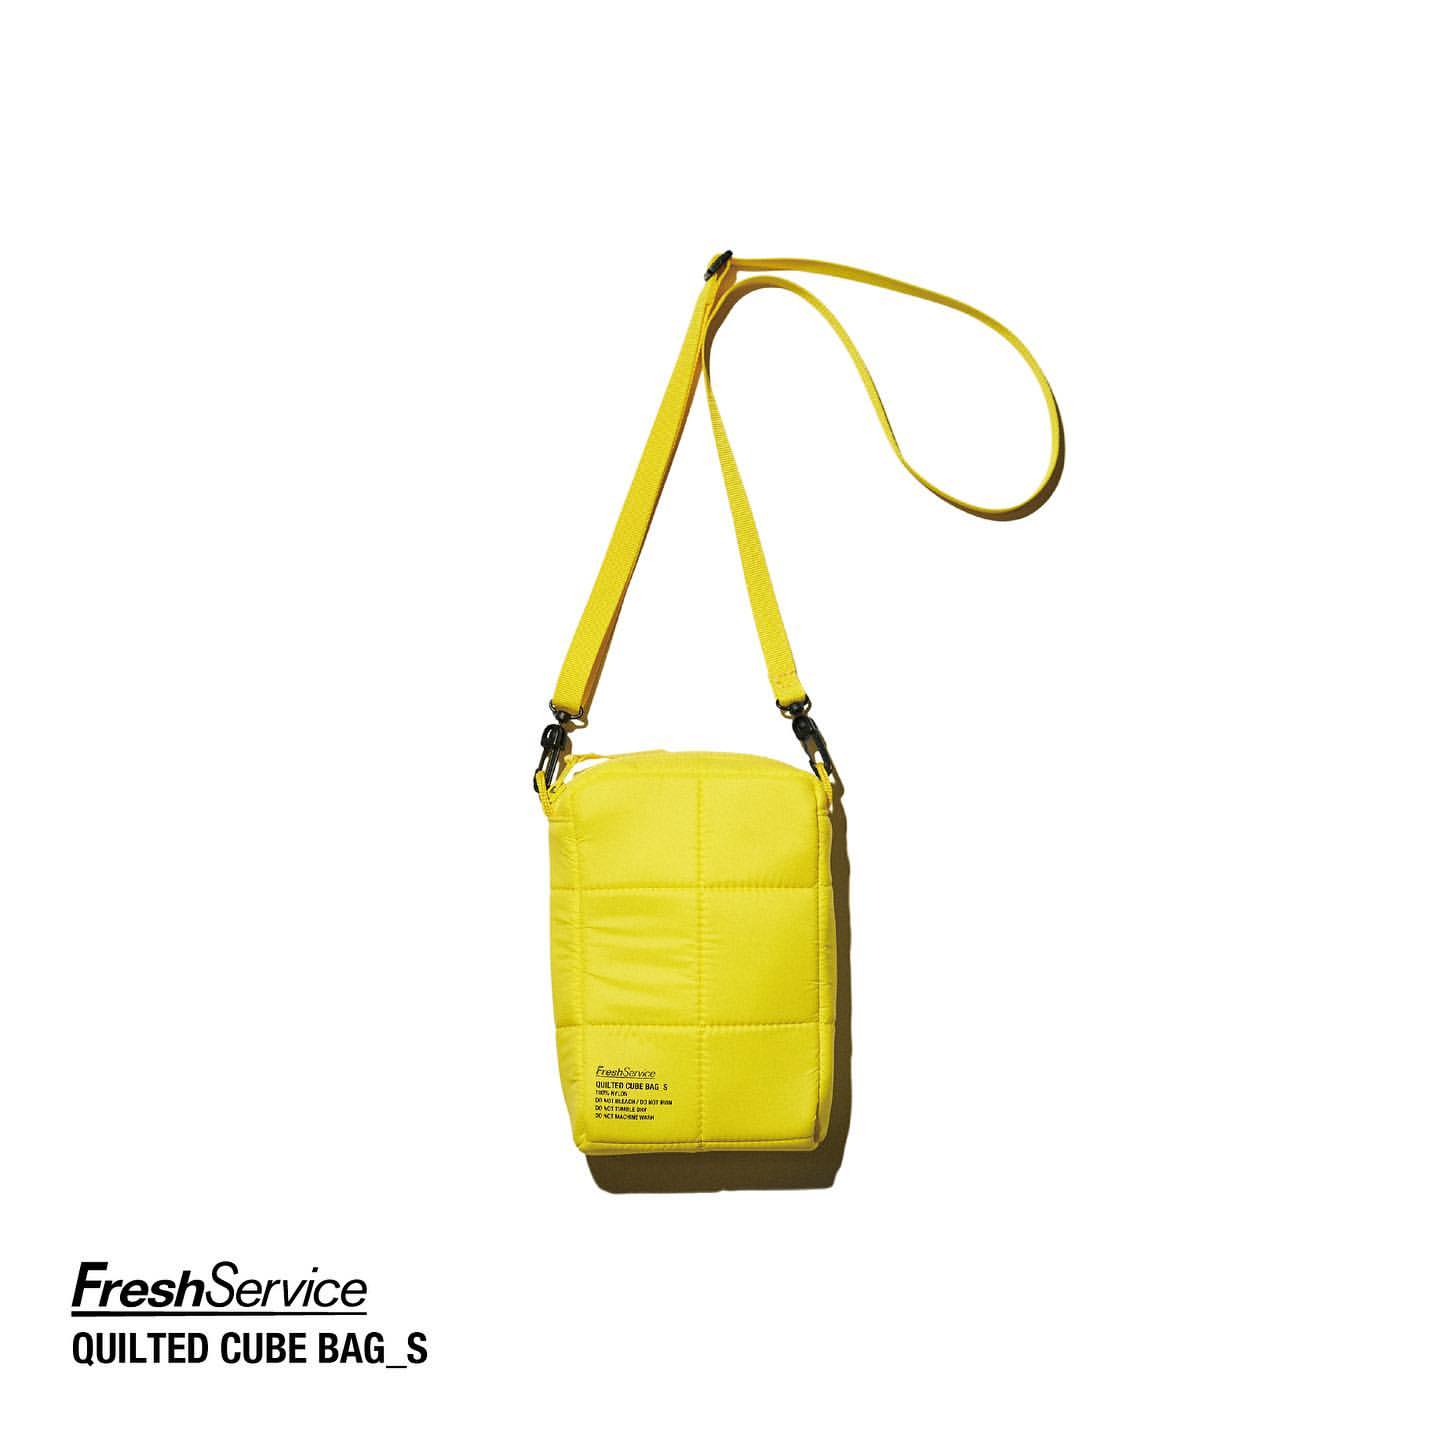 FreshService / QUILTED CUBE BAG_S